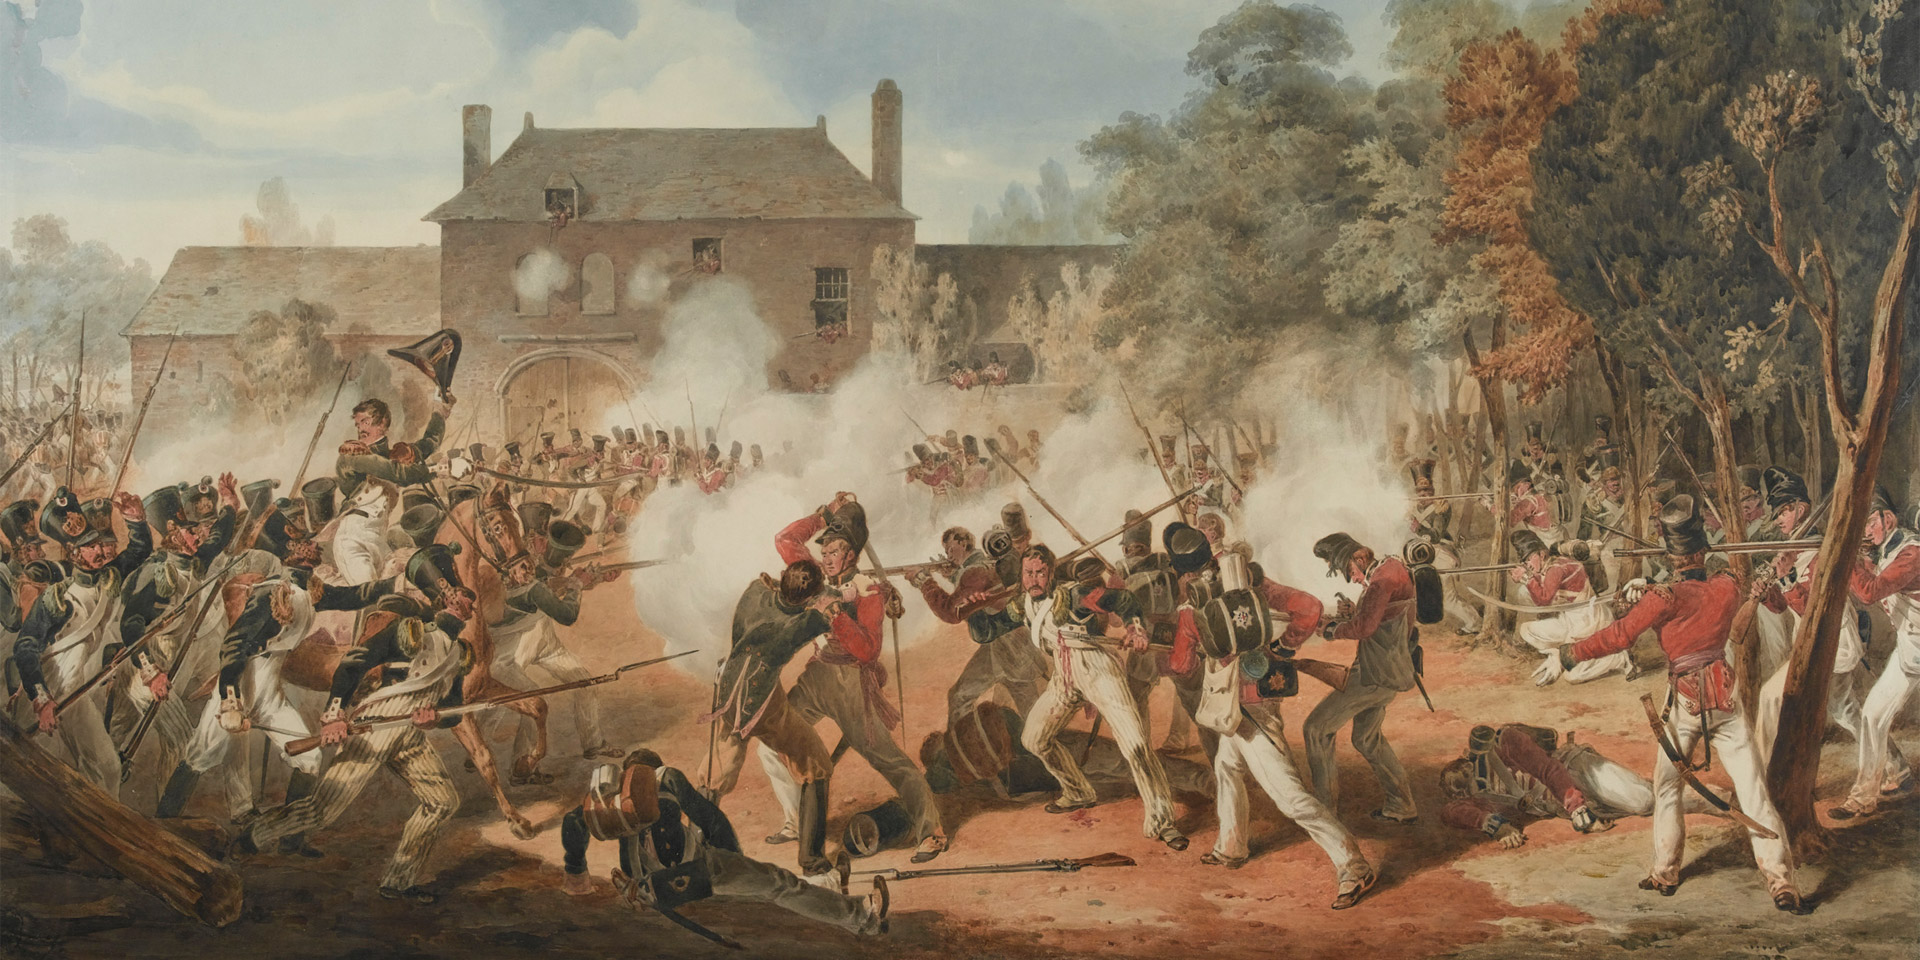 'Defence of the Chateau de Hougoumont', by Denis Dighton, 1815